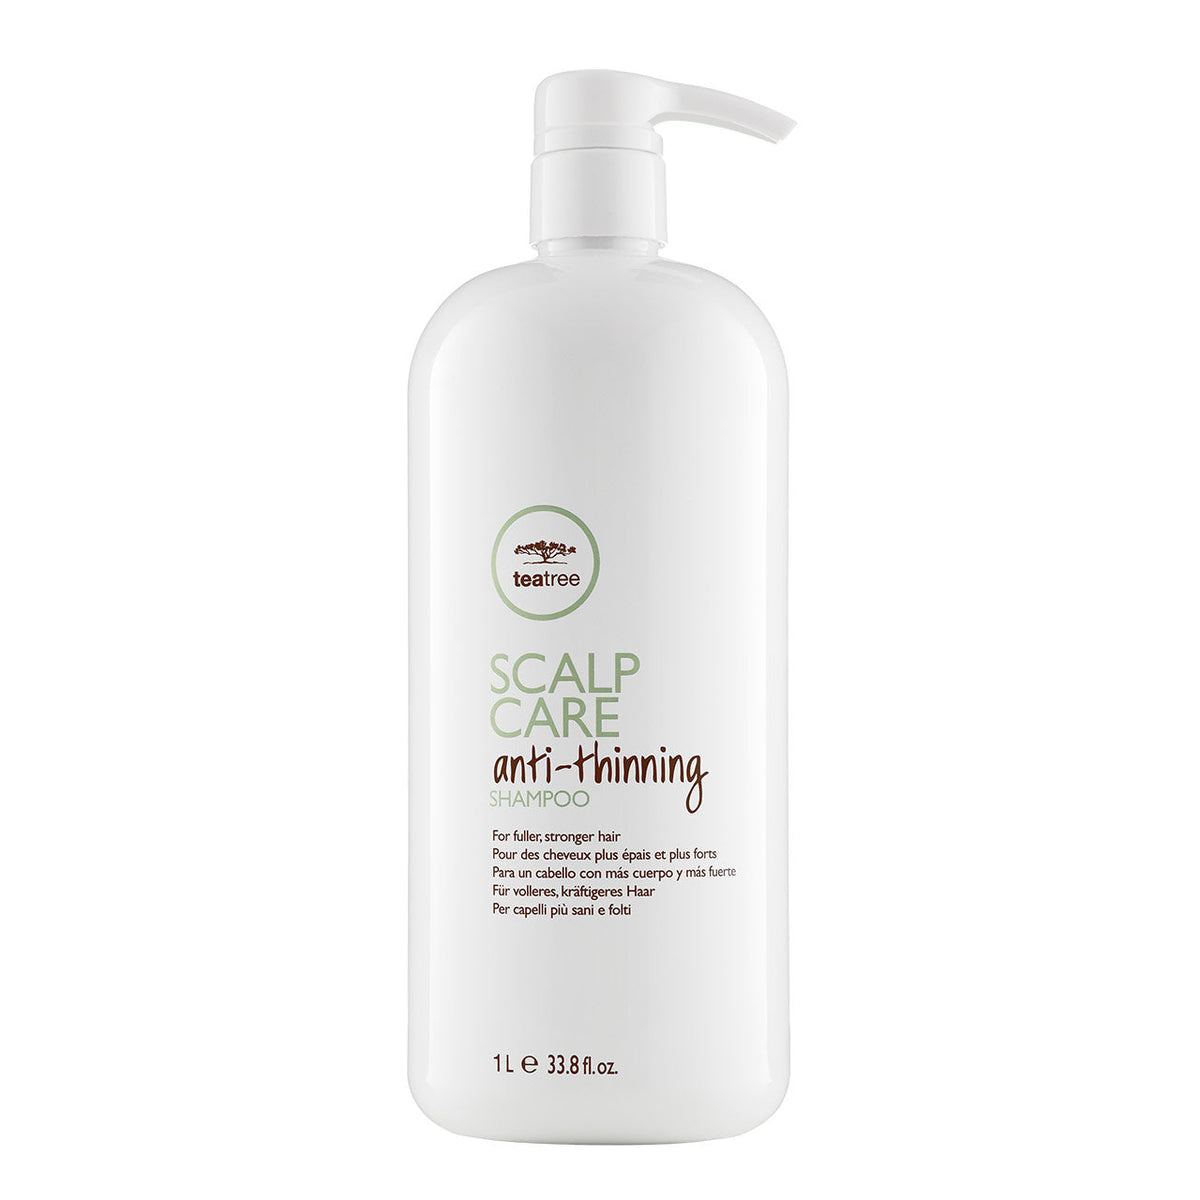 Tea Tree Scalp Care Anti-Thinning Shampoo - 1L - by Paul Mitchell |ProCare Outlet|